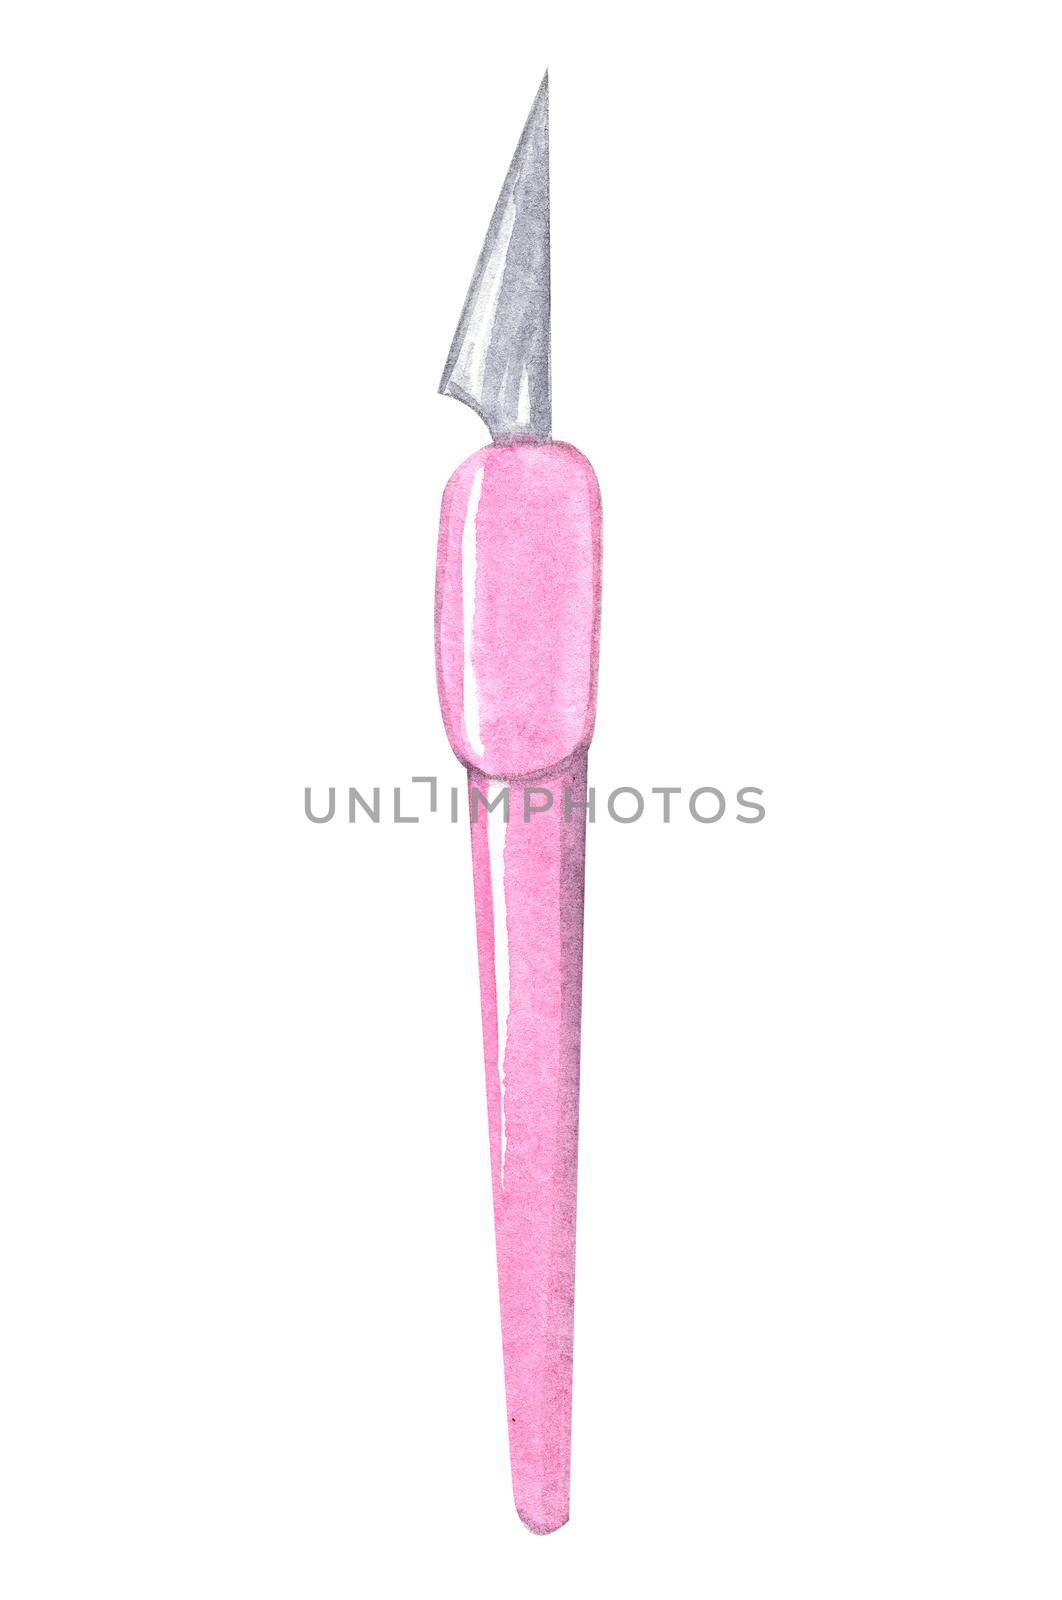 Watercolor pink scalpel tool for clay work isolated on white background